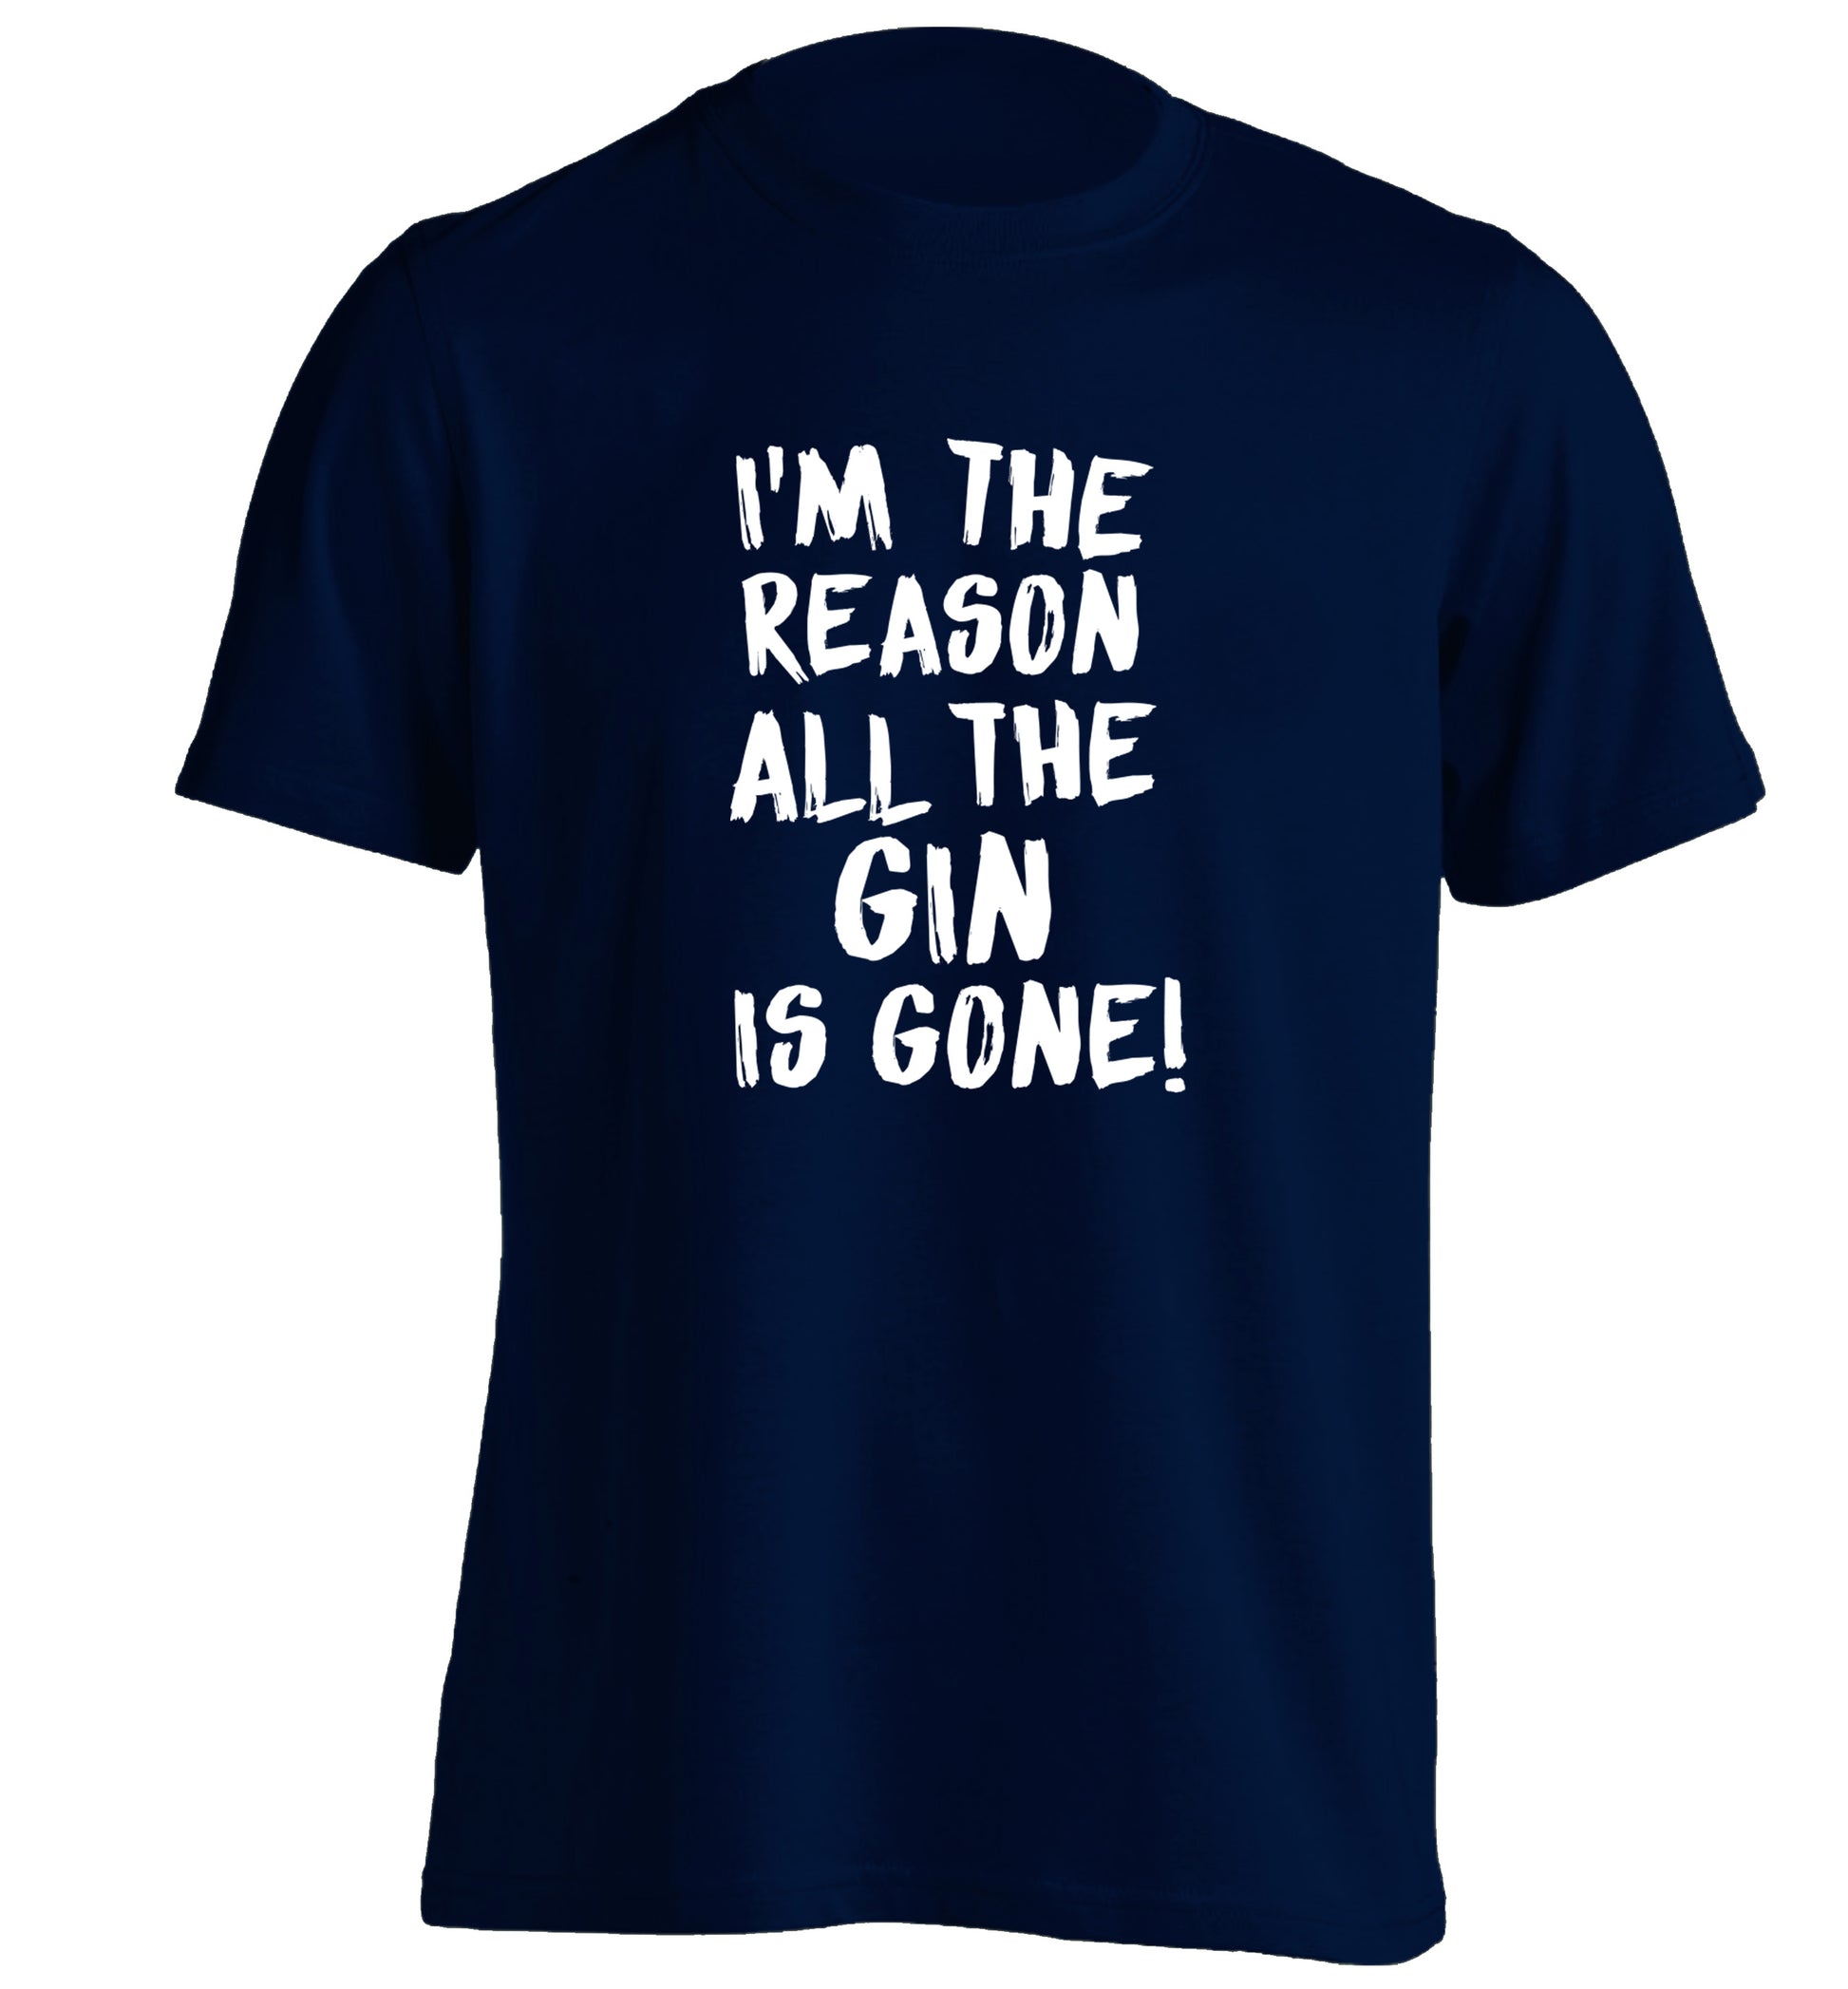 I'm the reason all the gin is gone adults unisex navy Tshirt 2XL